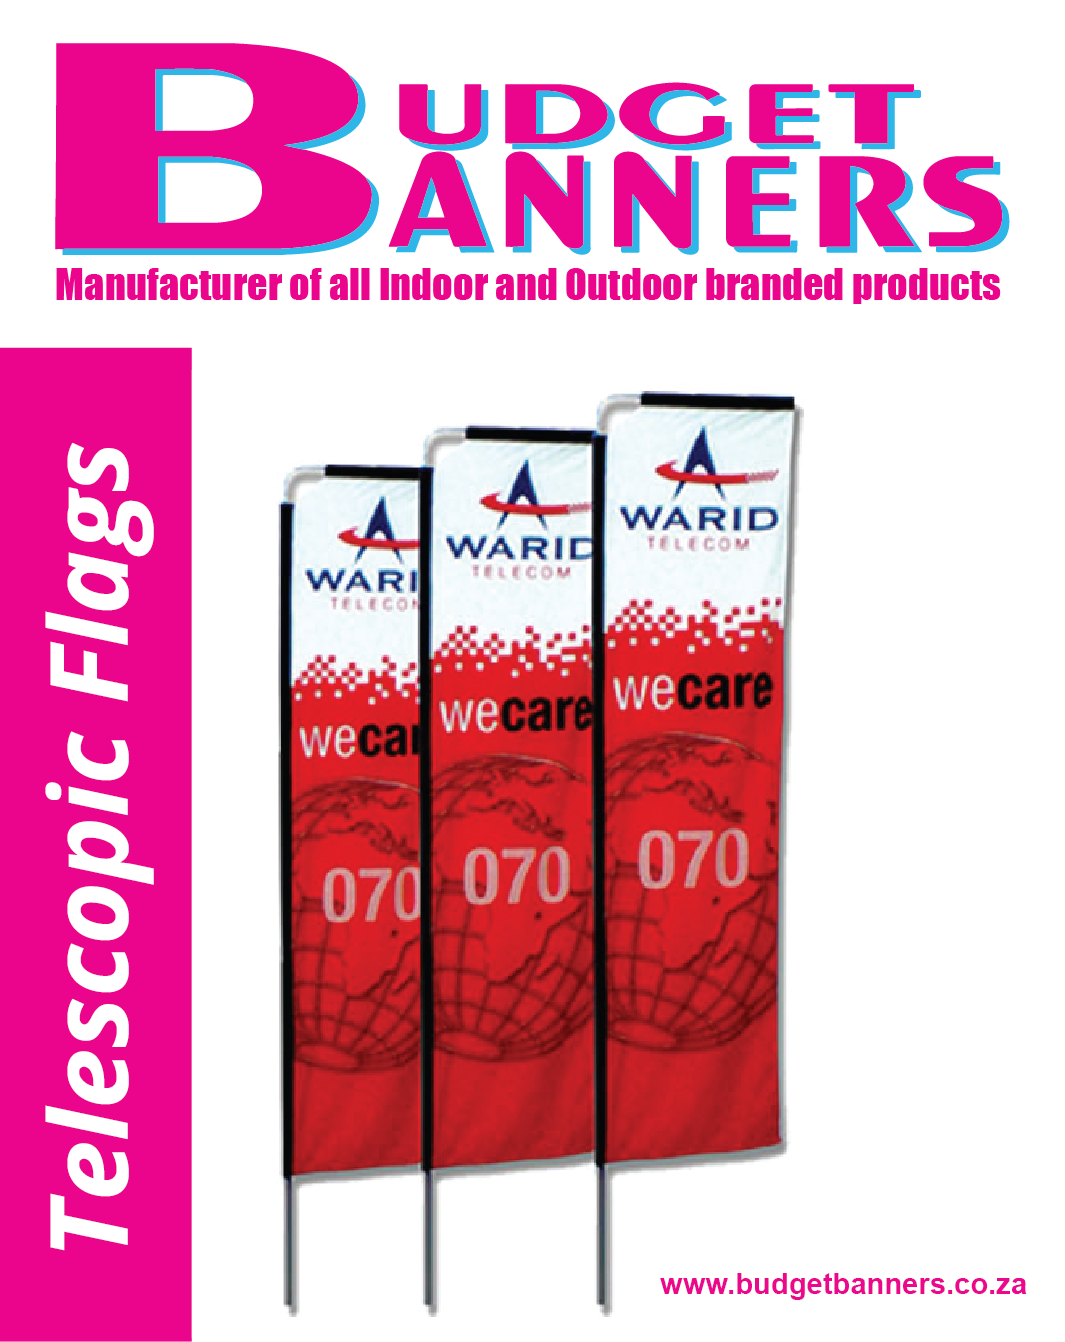 Budget banners telescopic flags